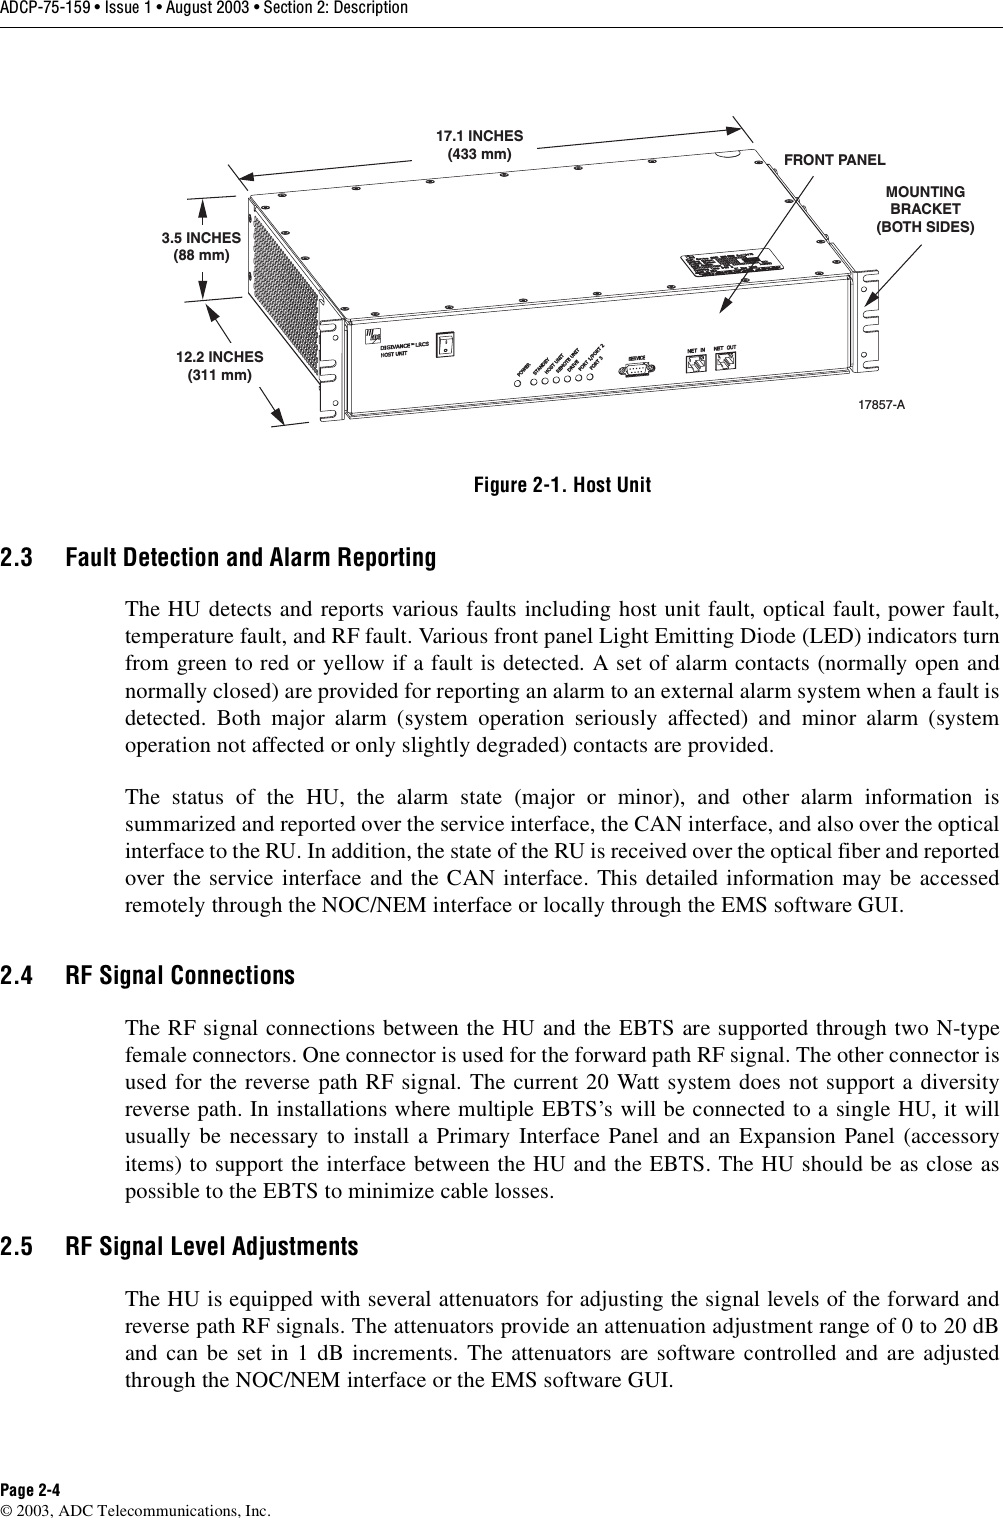 ADCP-75-159 • Issue 1 • August 2003 • Section 2: DescriptionPage 2-4© 2003, ADC Telecommunications, Inc.Figure 2-1. Host Unit2.3 Fault Detection and Alarm ReportingThe HU detects and reports various faults including host unit fault, optical fault, power fault,temperature fault, and RF fault. Various front panel Light Emitting Diode (LED) indicators turnfrom green to red or yellow if a fault is detected. A set of alarm contacts (normally open andnormally closed) are provided for reporting an alarm to an external alarm system when a fault isdetected. Both major alarm (system operation seriously affected) and minor alarm (systemoperation not affected or only slightly degraded) contacts are provided. The status of the HU, the alarm state (major or minor), and other alarm information issummarized and reported over the service interface, the CAN interface, and also over the opticalinterface to the RU. In addition, the state of the RU is received over the optical fiber and reportedover the service interface and the CAN interface. This detailed information may be accessedremotely through the NOC/NEM interface or locally through the EMS software GUI. 2.4 RF Signal ConnectionsThe RF signal connections between the HU and the EBTS are supported through two N-typefemale connectors. One connector is used for the forward path RF signal. The other connector isused for the reverse path RF signal. The current 20 Watt system does not support a diversityreverse path. In installations where multiple EBTS’s will be connected to a single HU, it willusually be necessary to install a Primary Interface Panel and an Expansion Panel (accessoryitems) to support the interface between the HU and the EBTS. The HU should be as close aspossible to the EBTS to minimize cable losses. 2.5 RF Signal Level AdjustmentsThe HU is equipped with several attenuators for adjusting the signal levels of the forward andreverse path RF signals. The attenuators provide an attenuation adjustment range of 0 to 20 dBand can be set in 1 dB increments. The attenuators are software controlled and are adjustedthrough the NOC/NEM interface or the EMS software GUI. 17.1 INCHES(433 mm)3.5 INCHES(88 mm)12.2 INCHES(311 mm)FRONT PANELMOUNTINGBRACKET(BOTH SIDES)17857-A